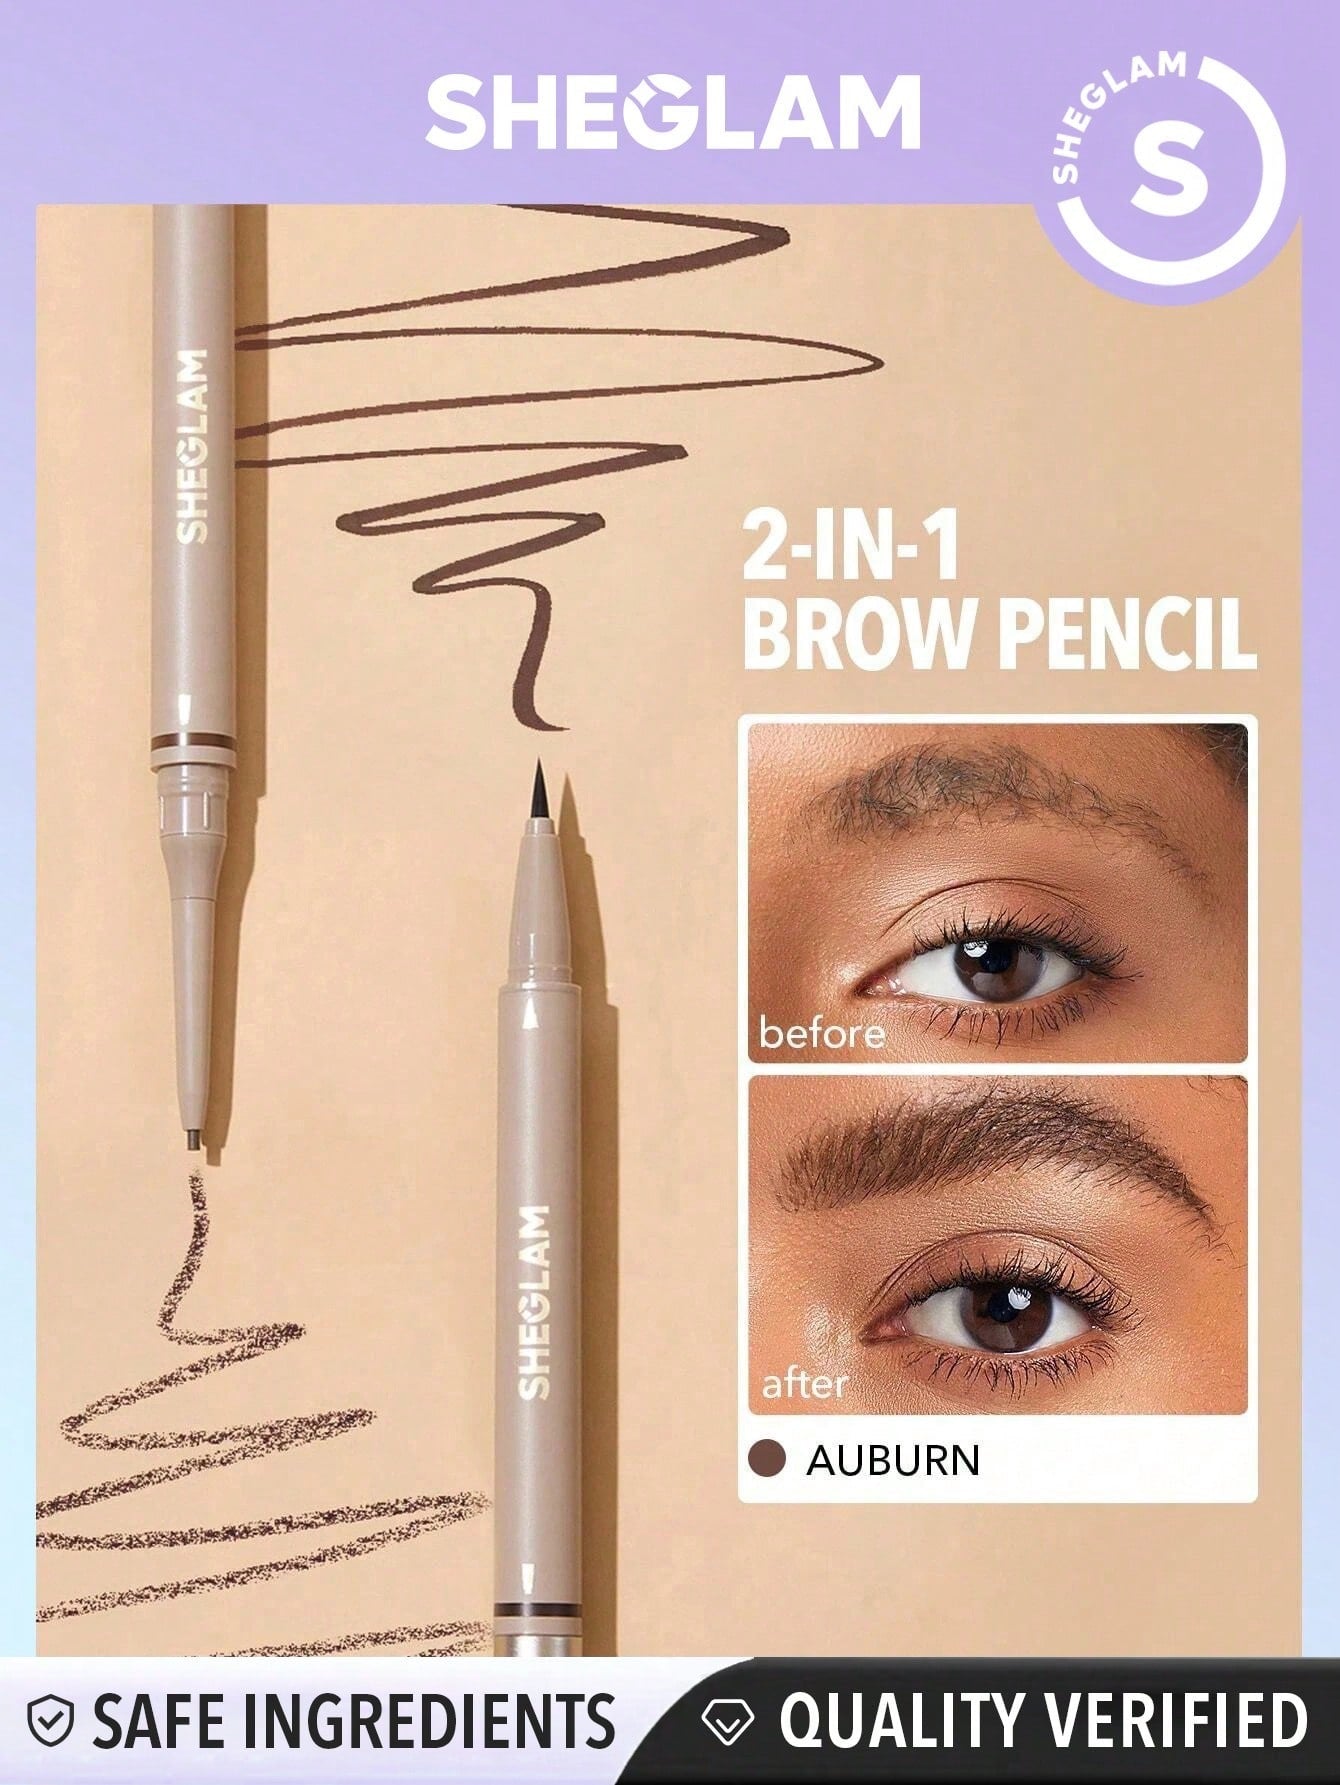 SHEGLAM Brows On Demand 2-In-1 Brow Pencil